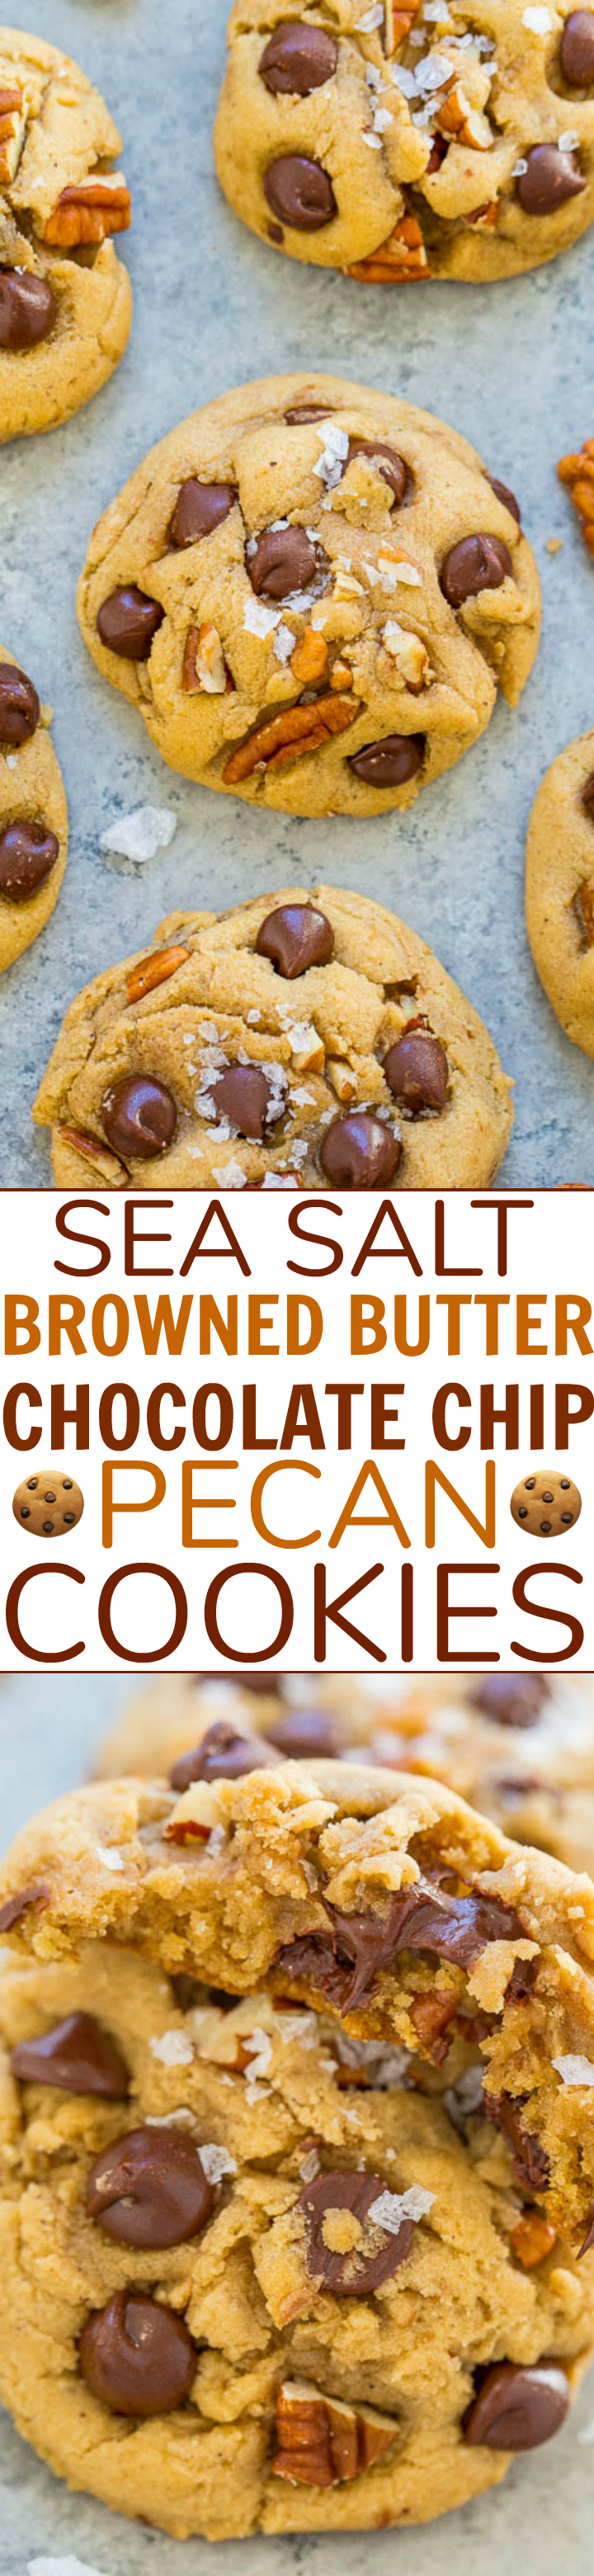 Sea Salt Browned Butter Chocolate Chip Pecan Cookies – Super soft, perfectly chewy, SALTY-AND-SWEET chocolate chip cookies that are AMAZING!! An EASY, one-bowl, no-mixer recipe!!